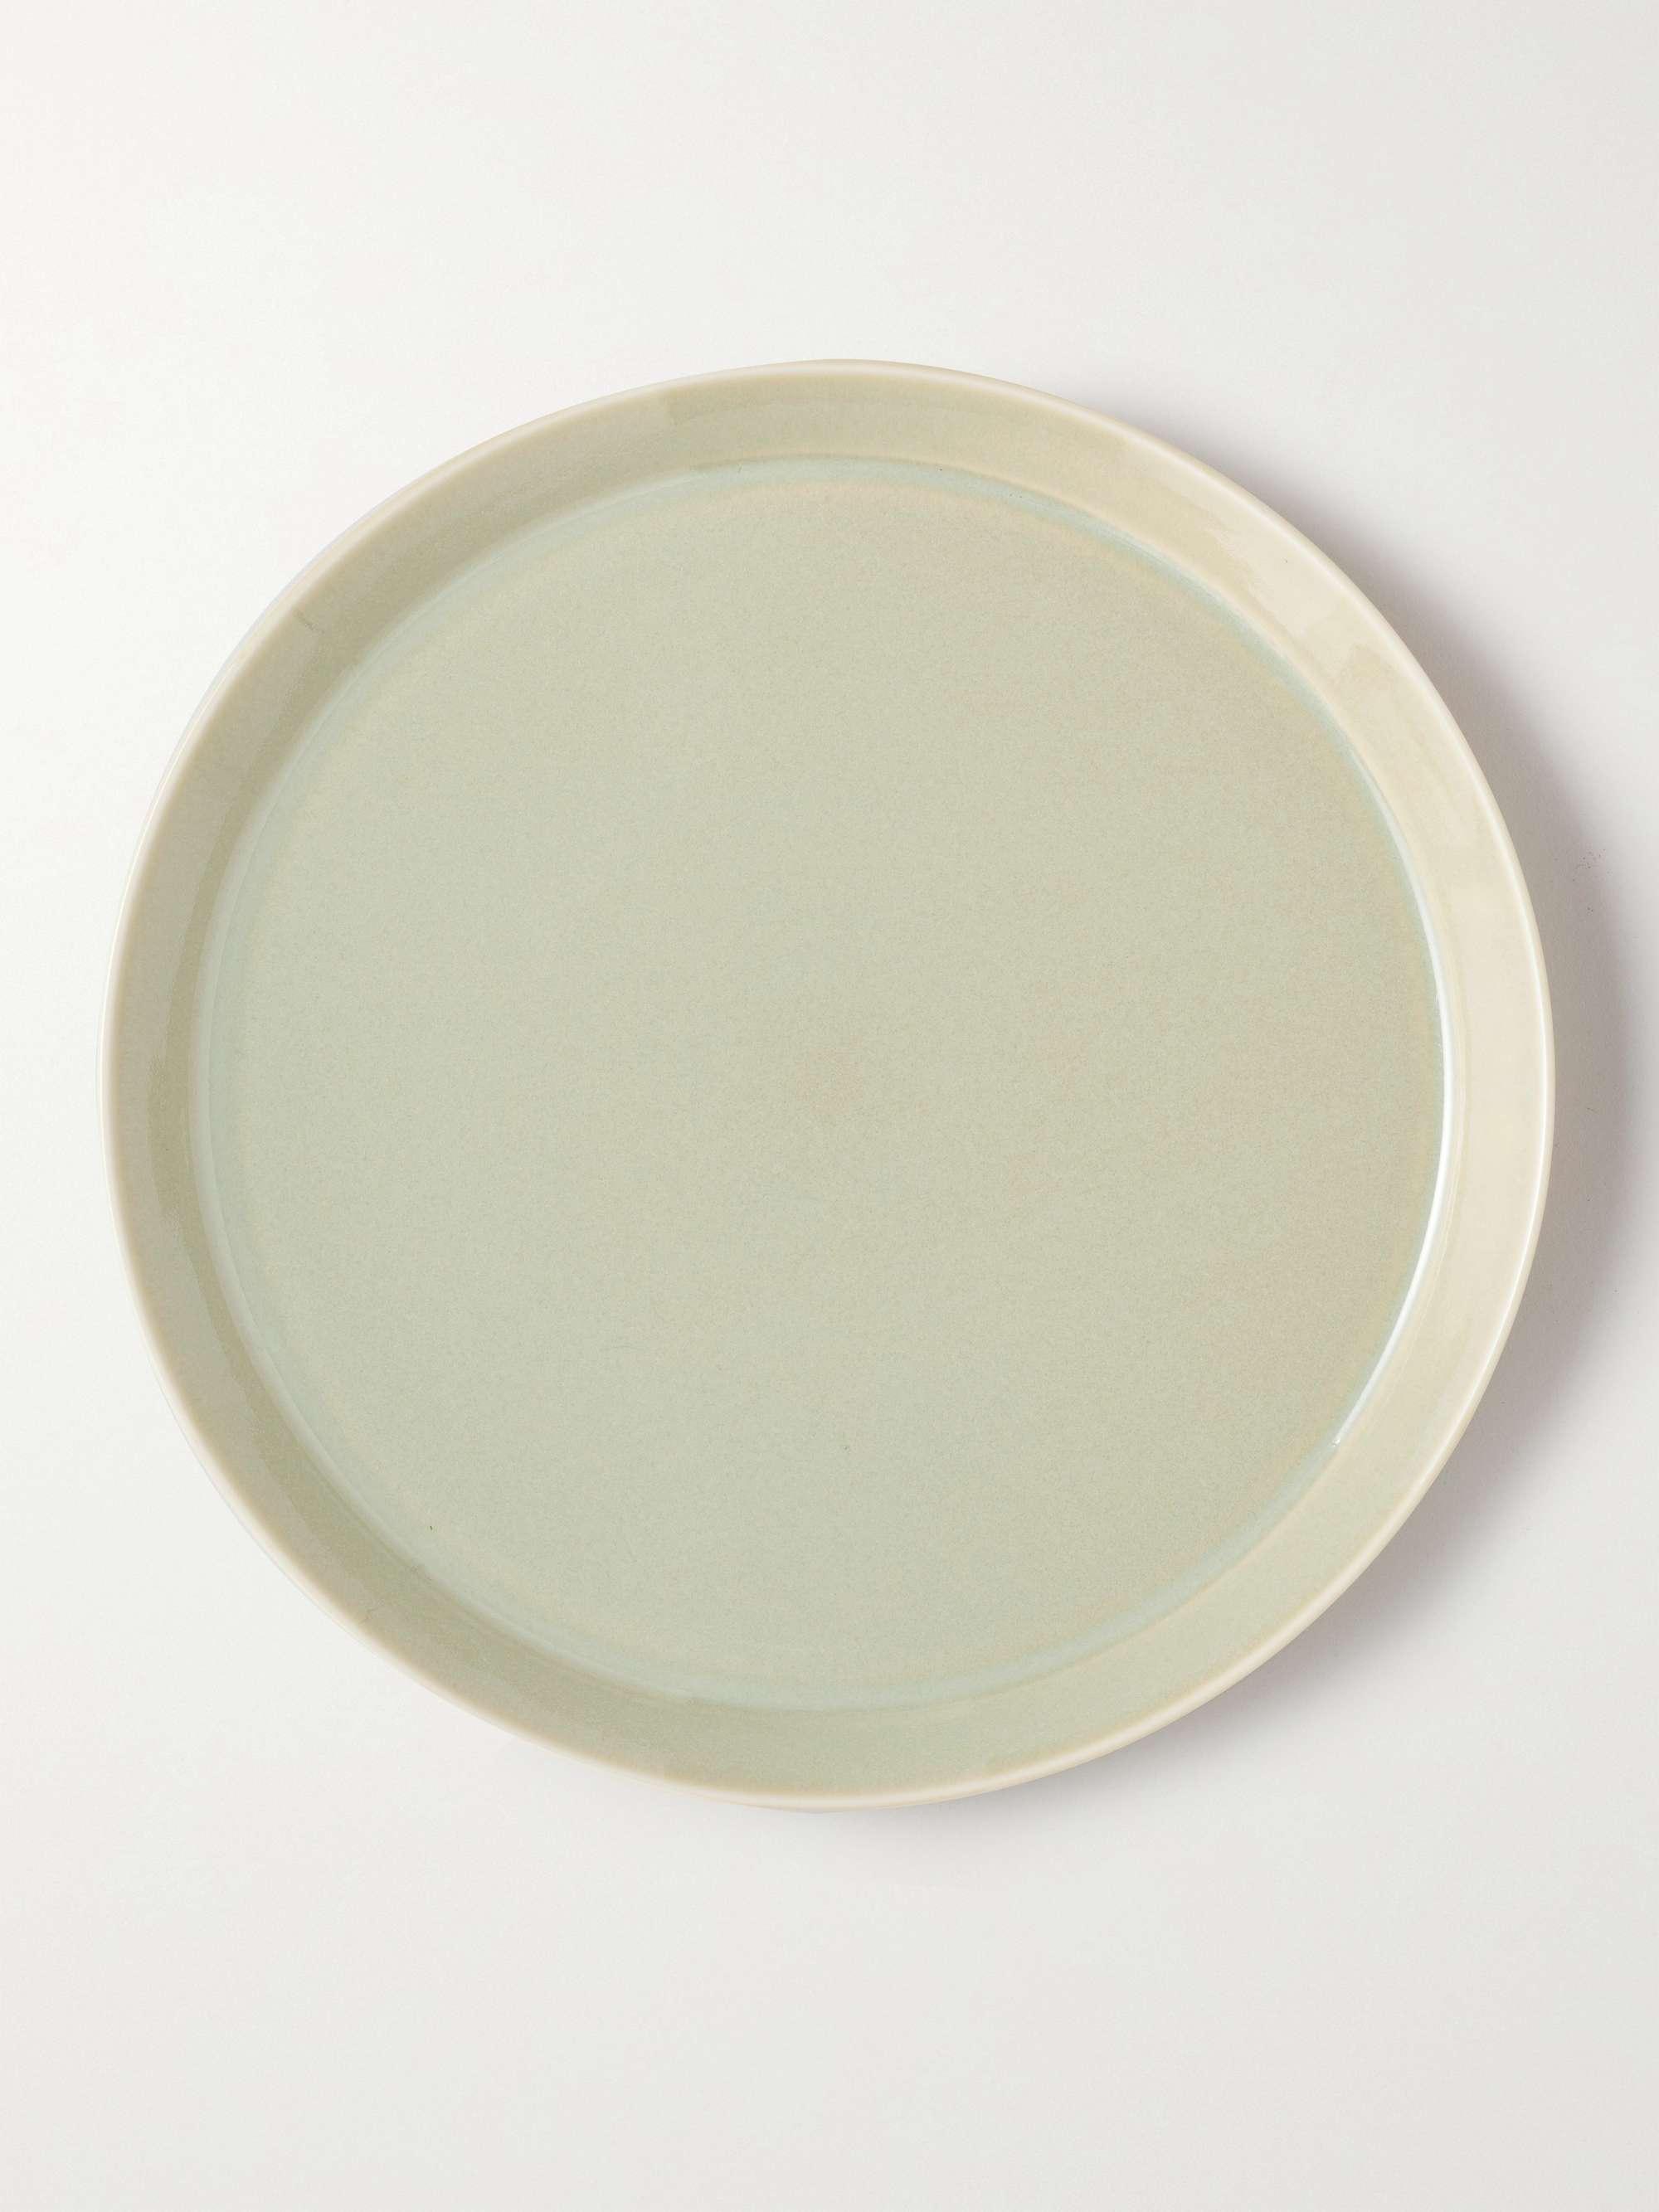 BY JAPAN Maruhiro + Hasami Large Porcelain Plate